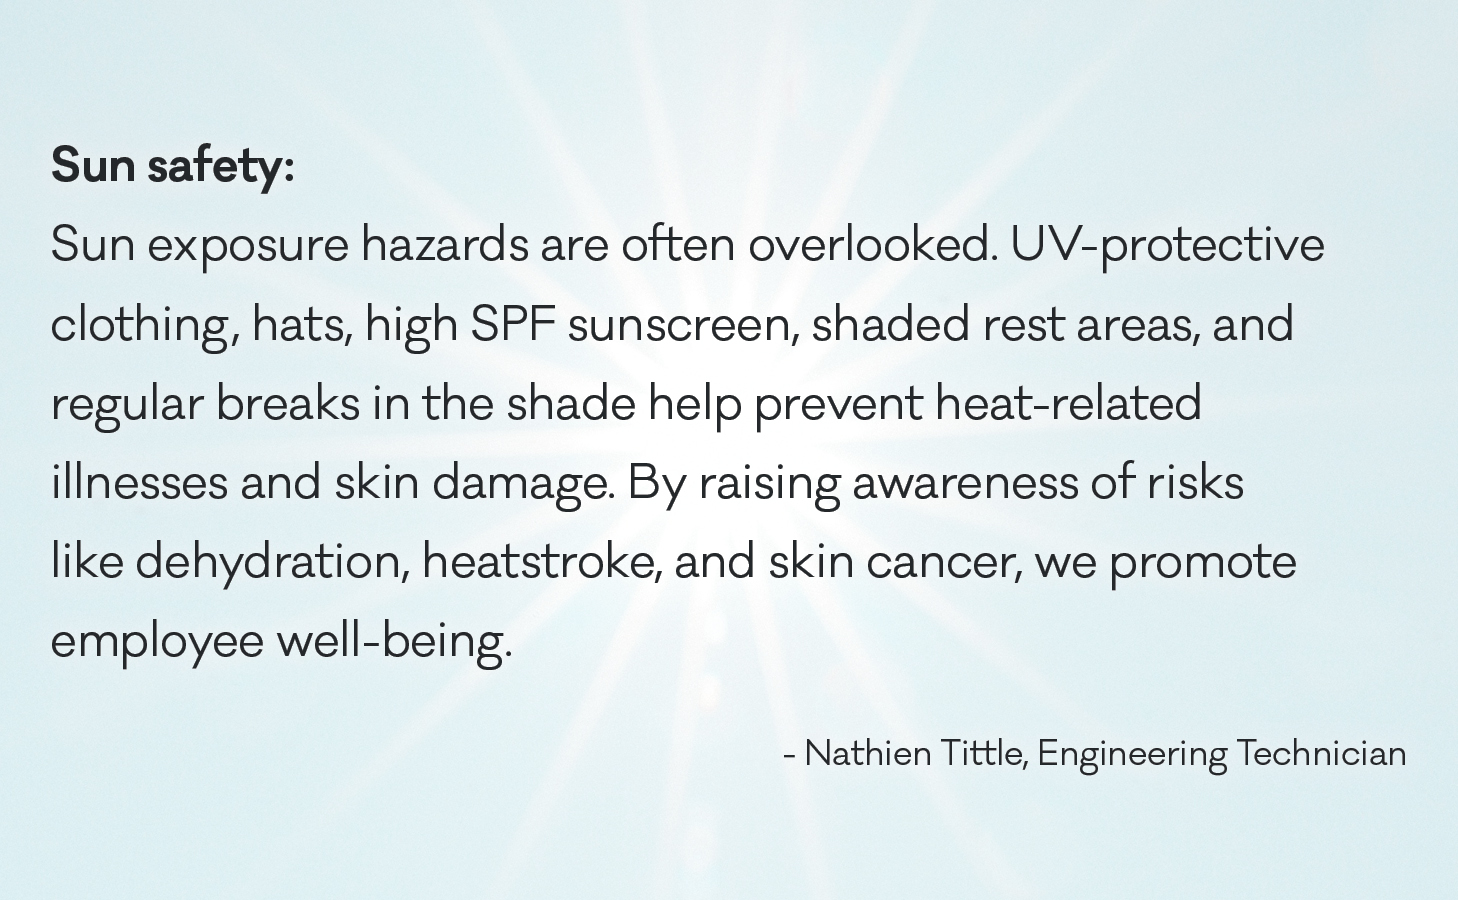 Sun exposure hazards are often overlooked. UV-protective clothing, hats, high SPF sunscreen, shaded rest areas, and regular breaks in the shade help prevent heat-related illnesses and skin damage. By raising awareness of risks like dehydration, heatstroke, and skin cancer, we promote employee well-being.